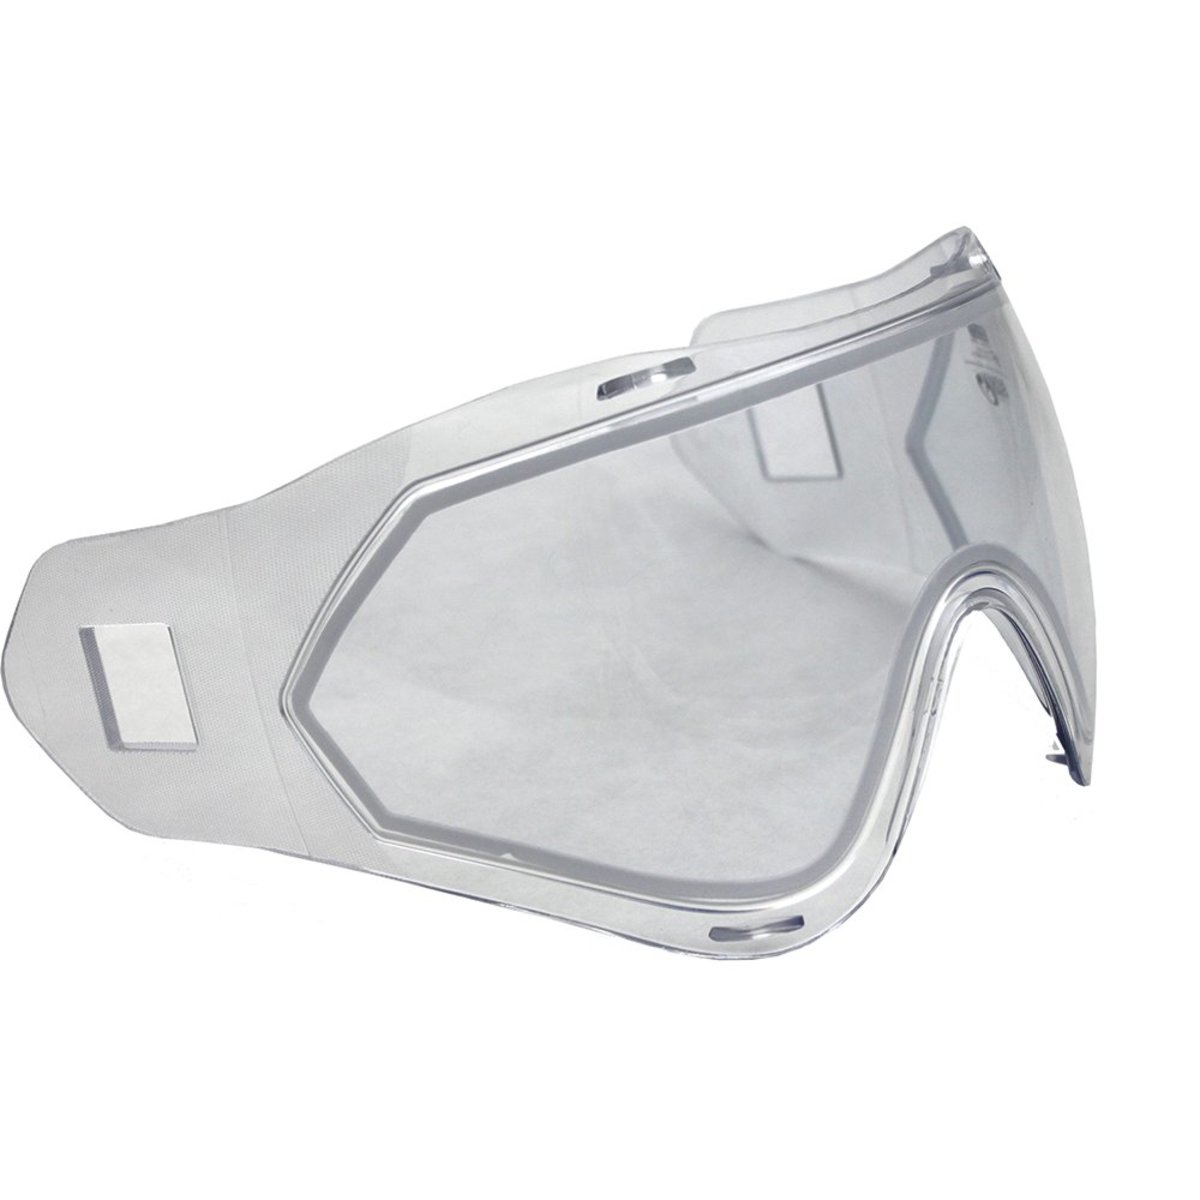 Valken Profit Thermal Goggle Lens | Paintball Goggle Lens